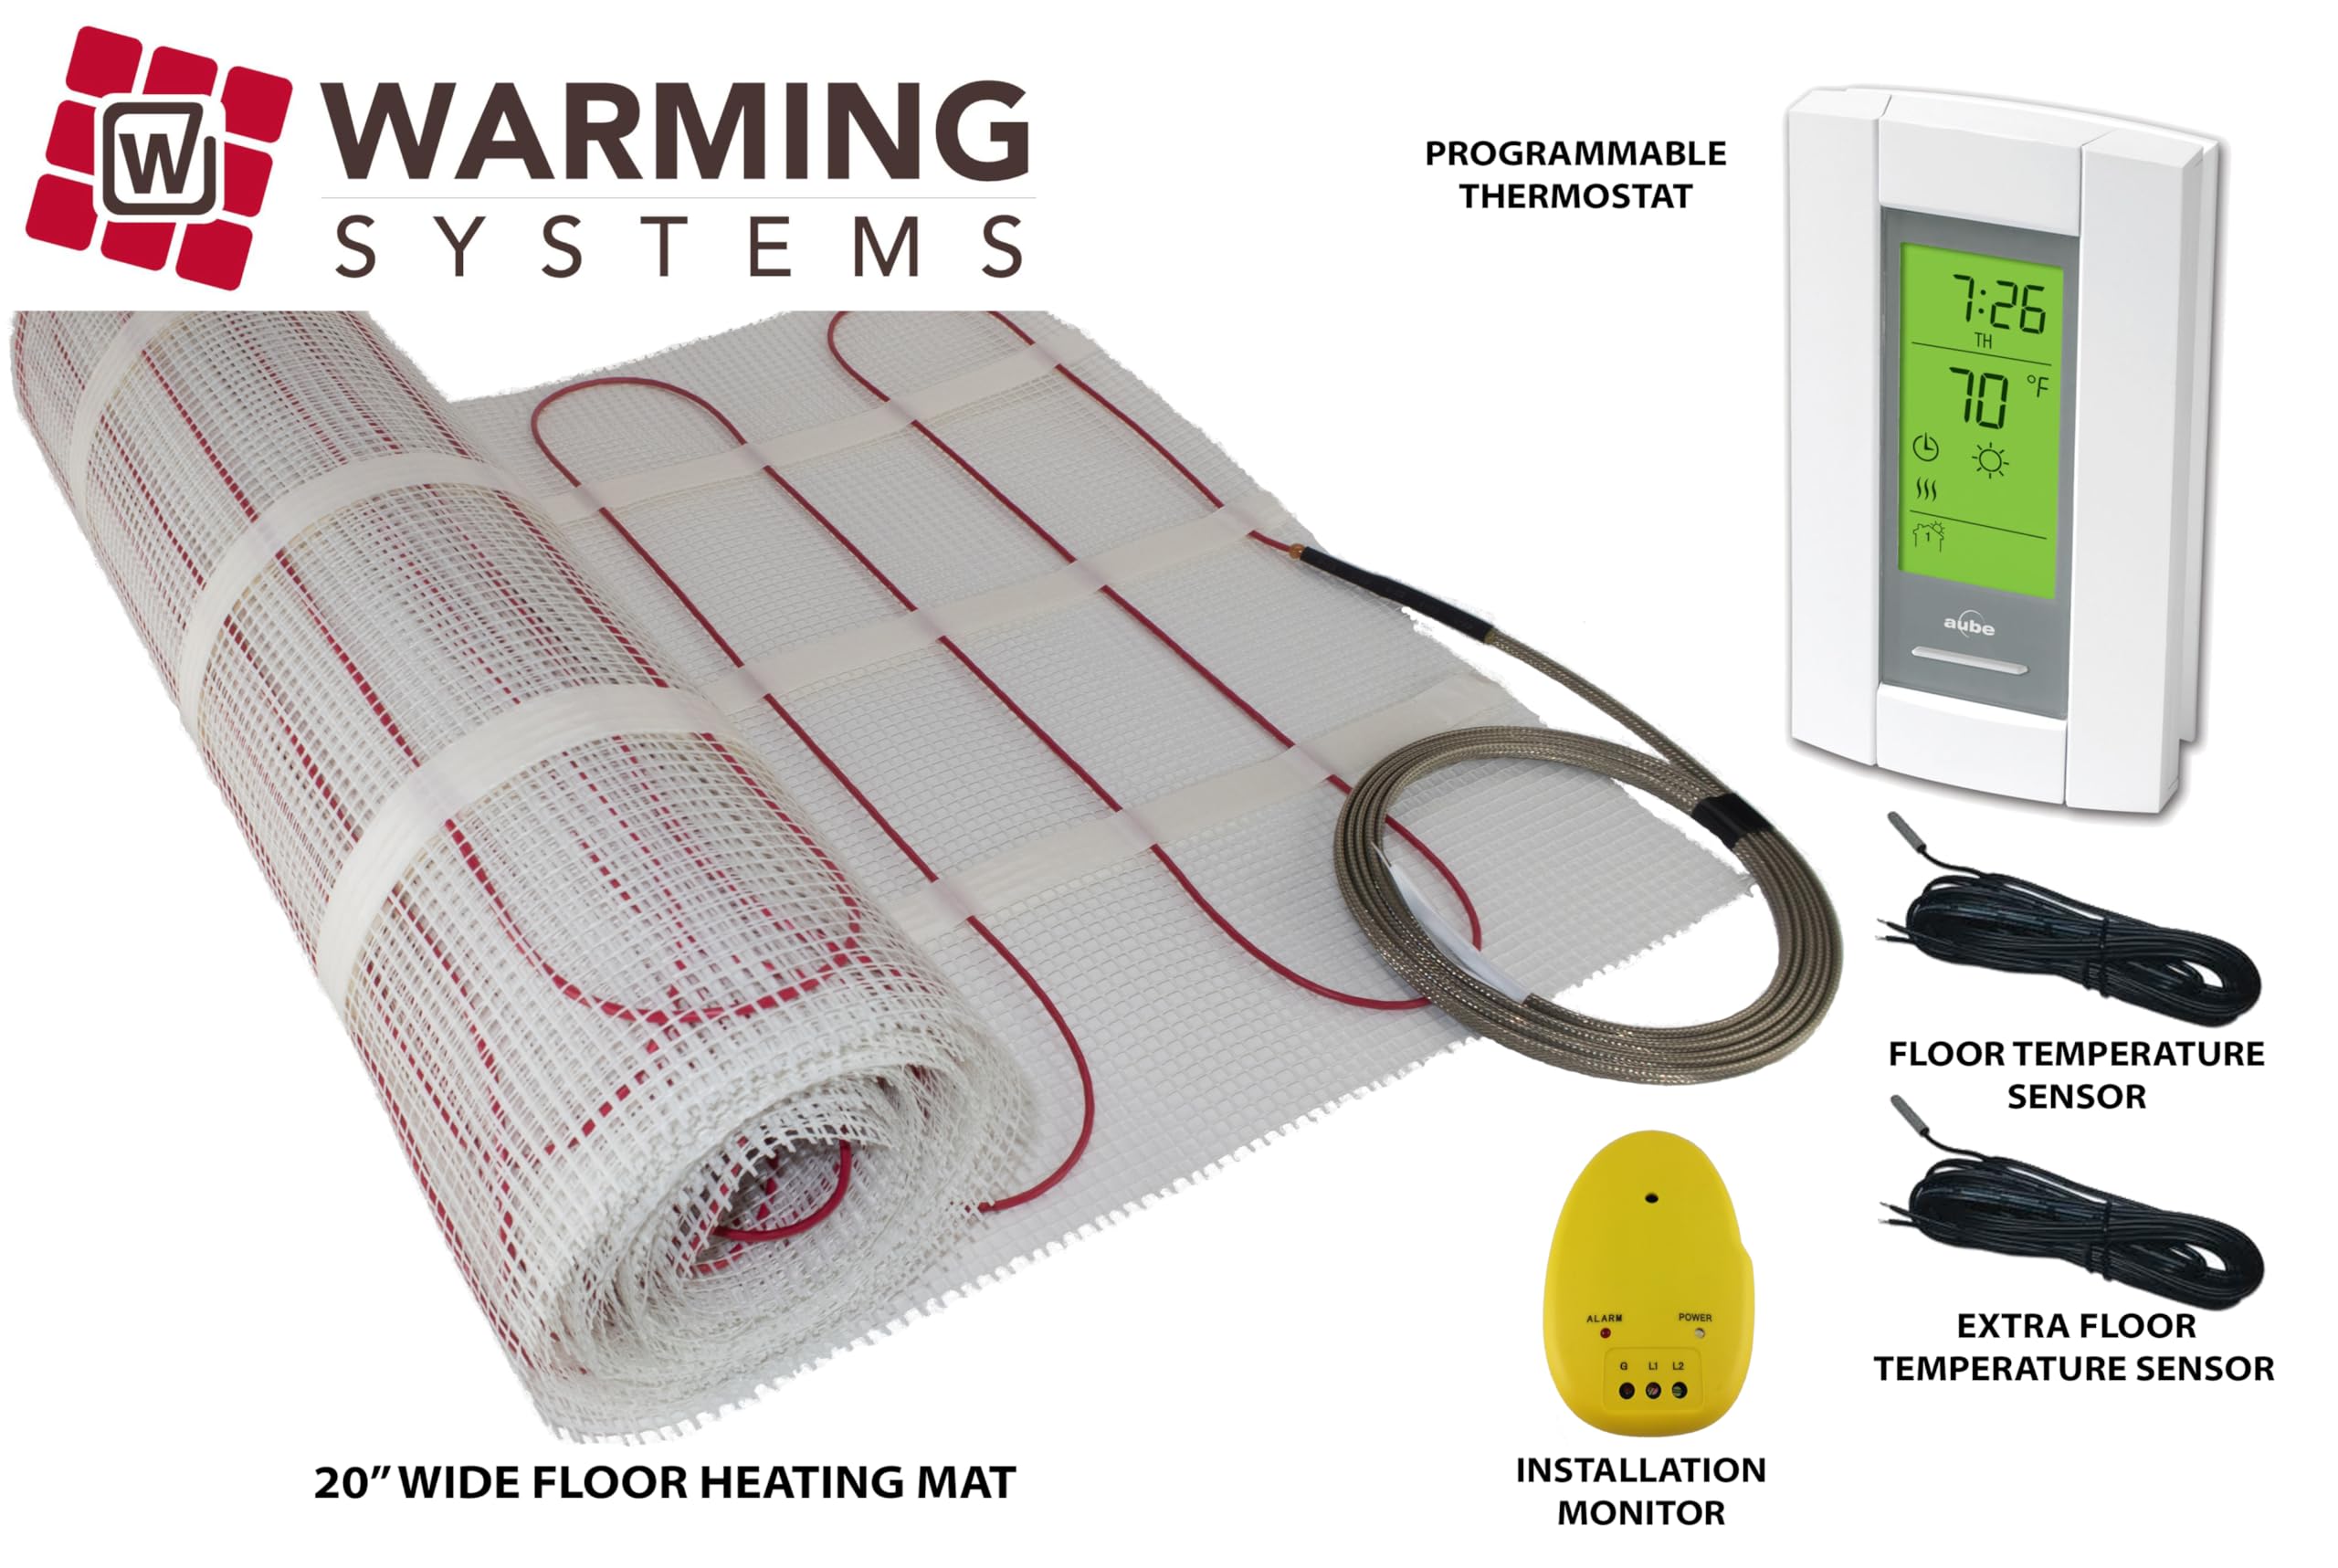 15 Sqft Mat, Electric Radiant Floor Heating System with Digital Floor Sensing Thermostat, Includes 2 Floor Temperature Sensors and Installation Monitor, Heated Floor System, Radiant Floor Heating Mat